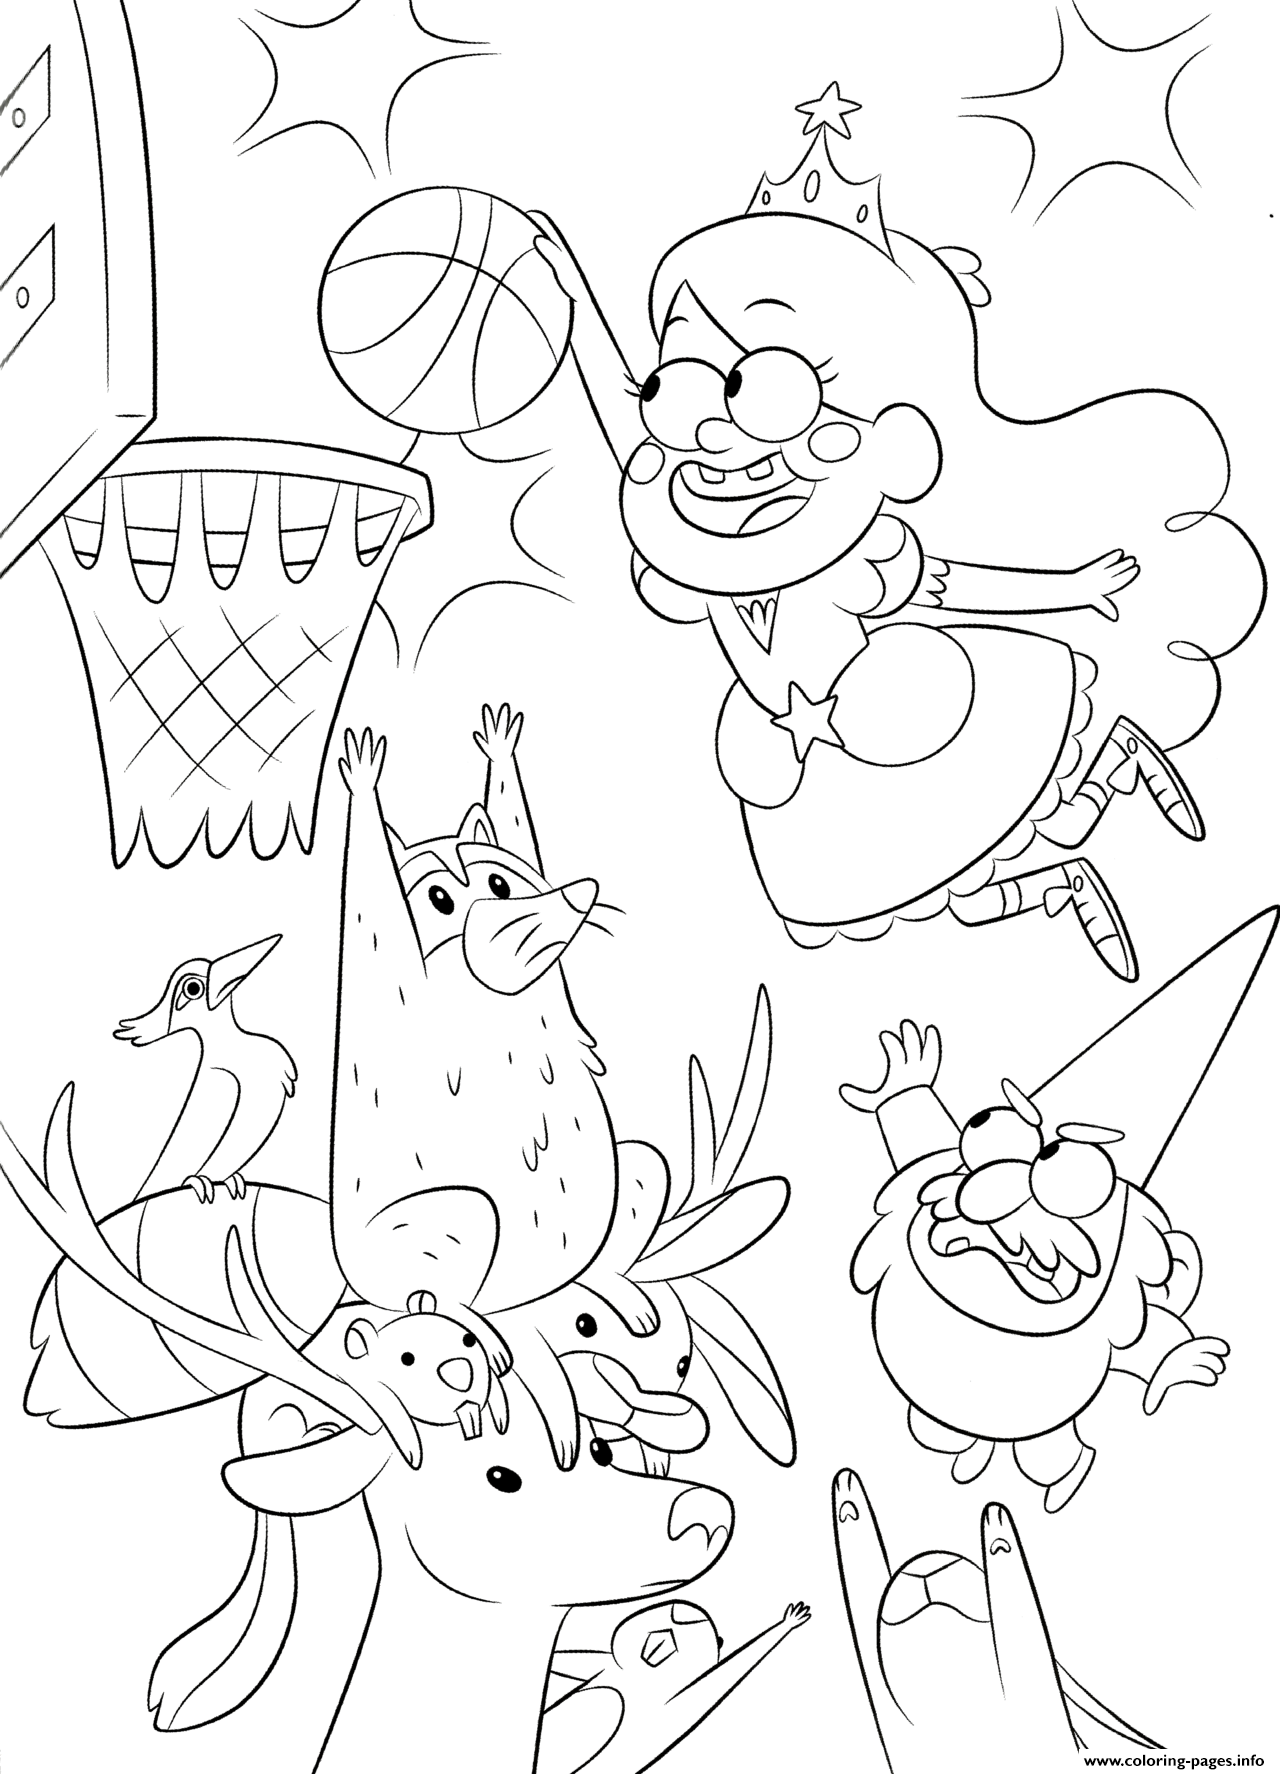 Gravity Falls Coloring Pages - Coloring Home